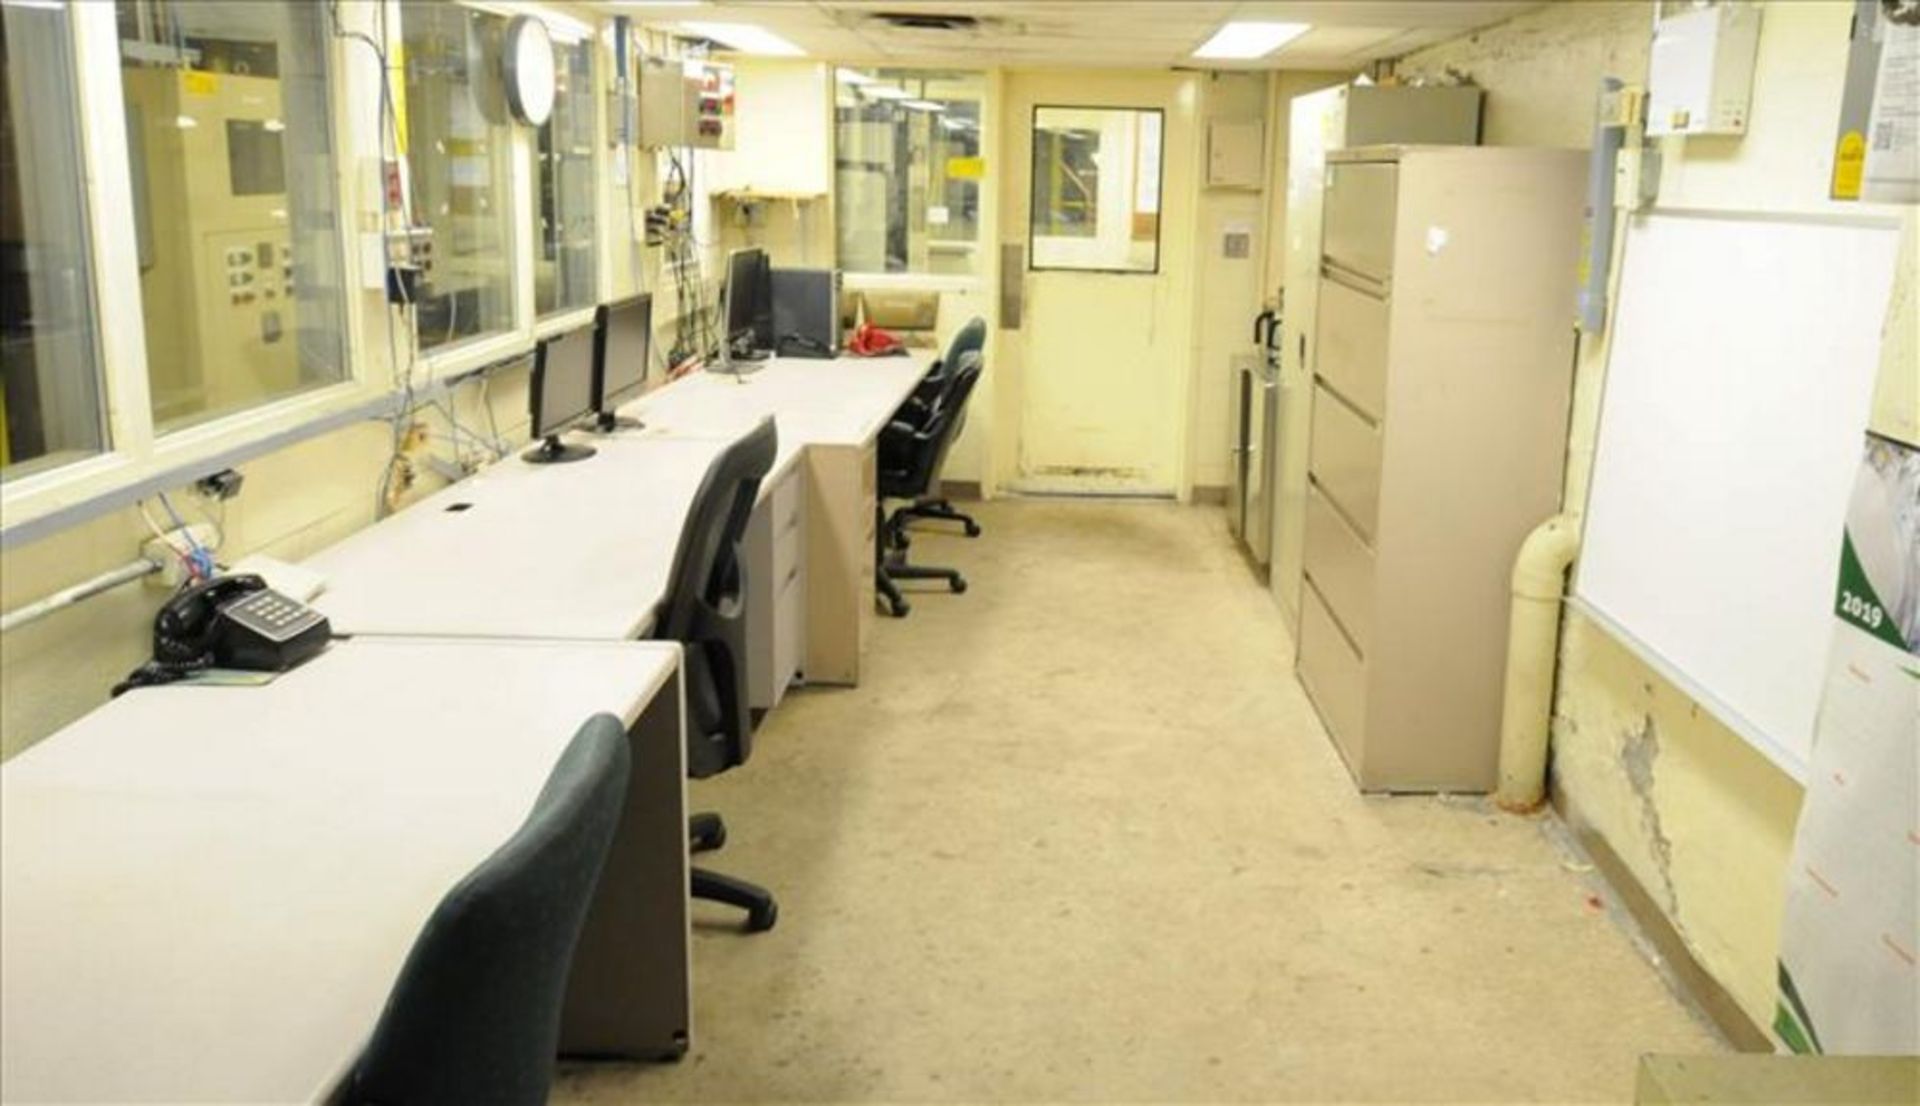 lot/ contents of boiler control room consisting of screens, desks, chairs and cabinets [Powerhouse] - Image 2 of 3